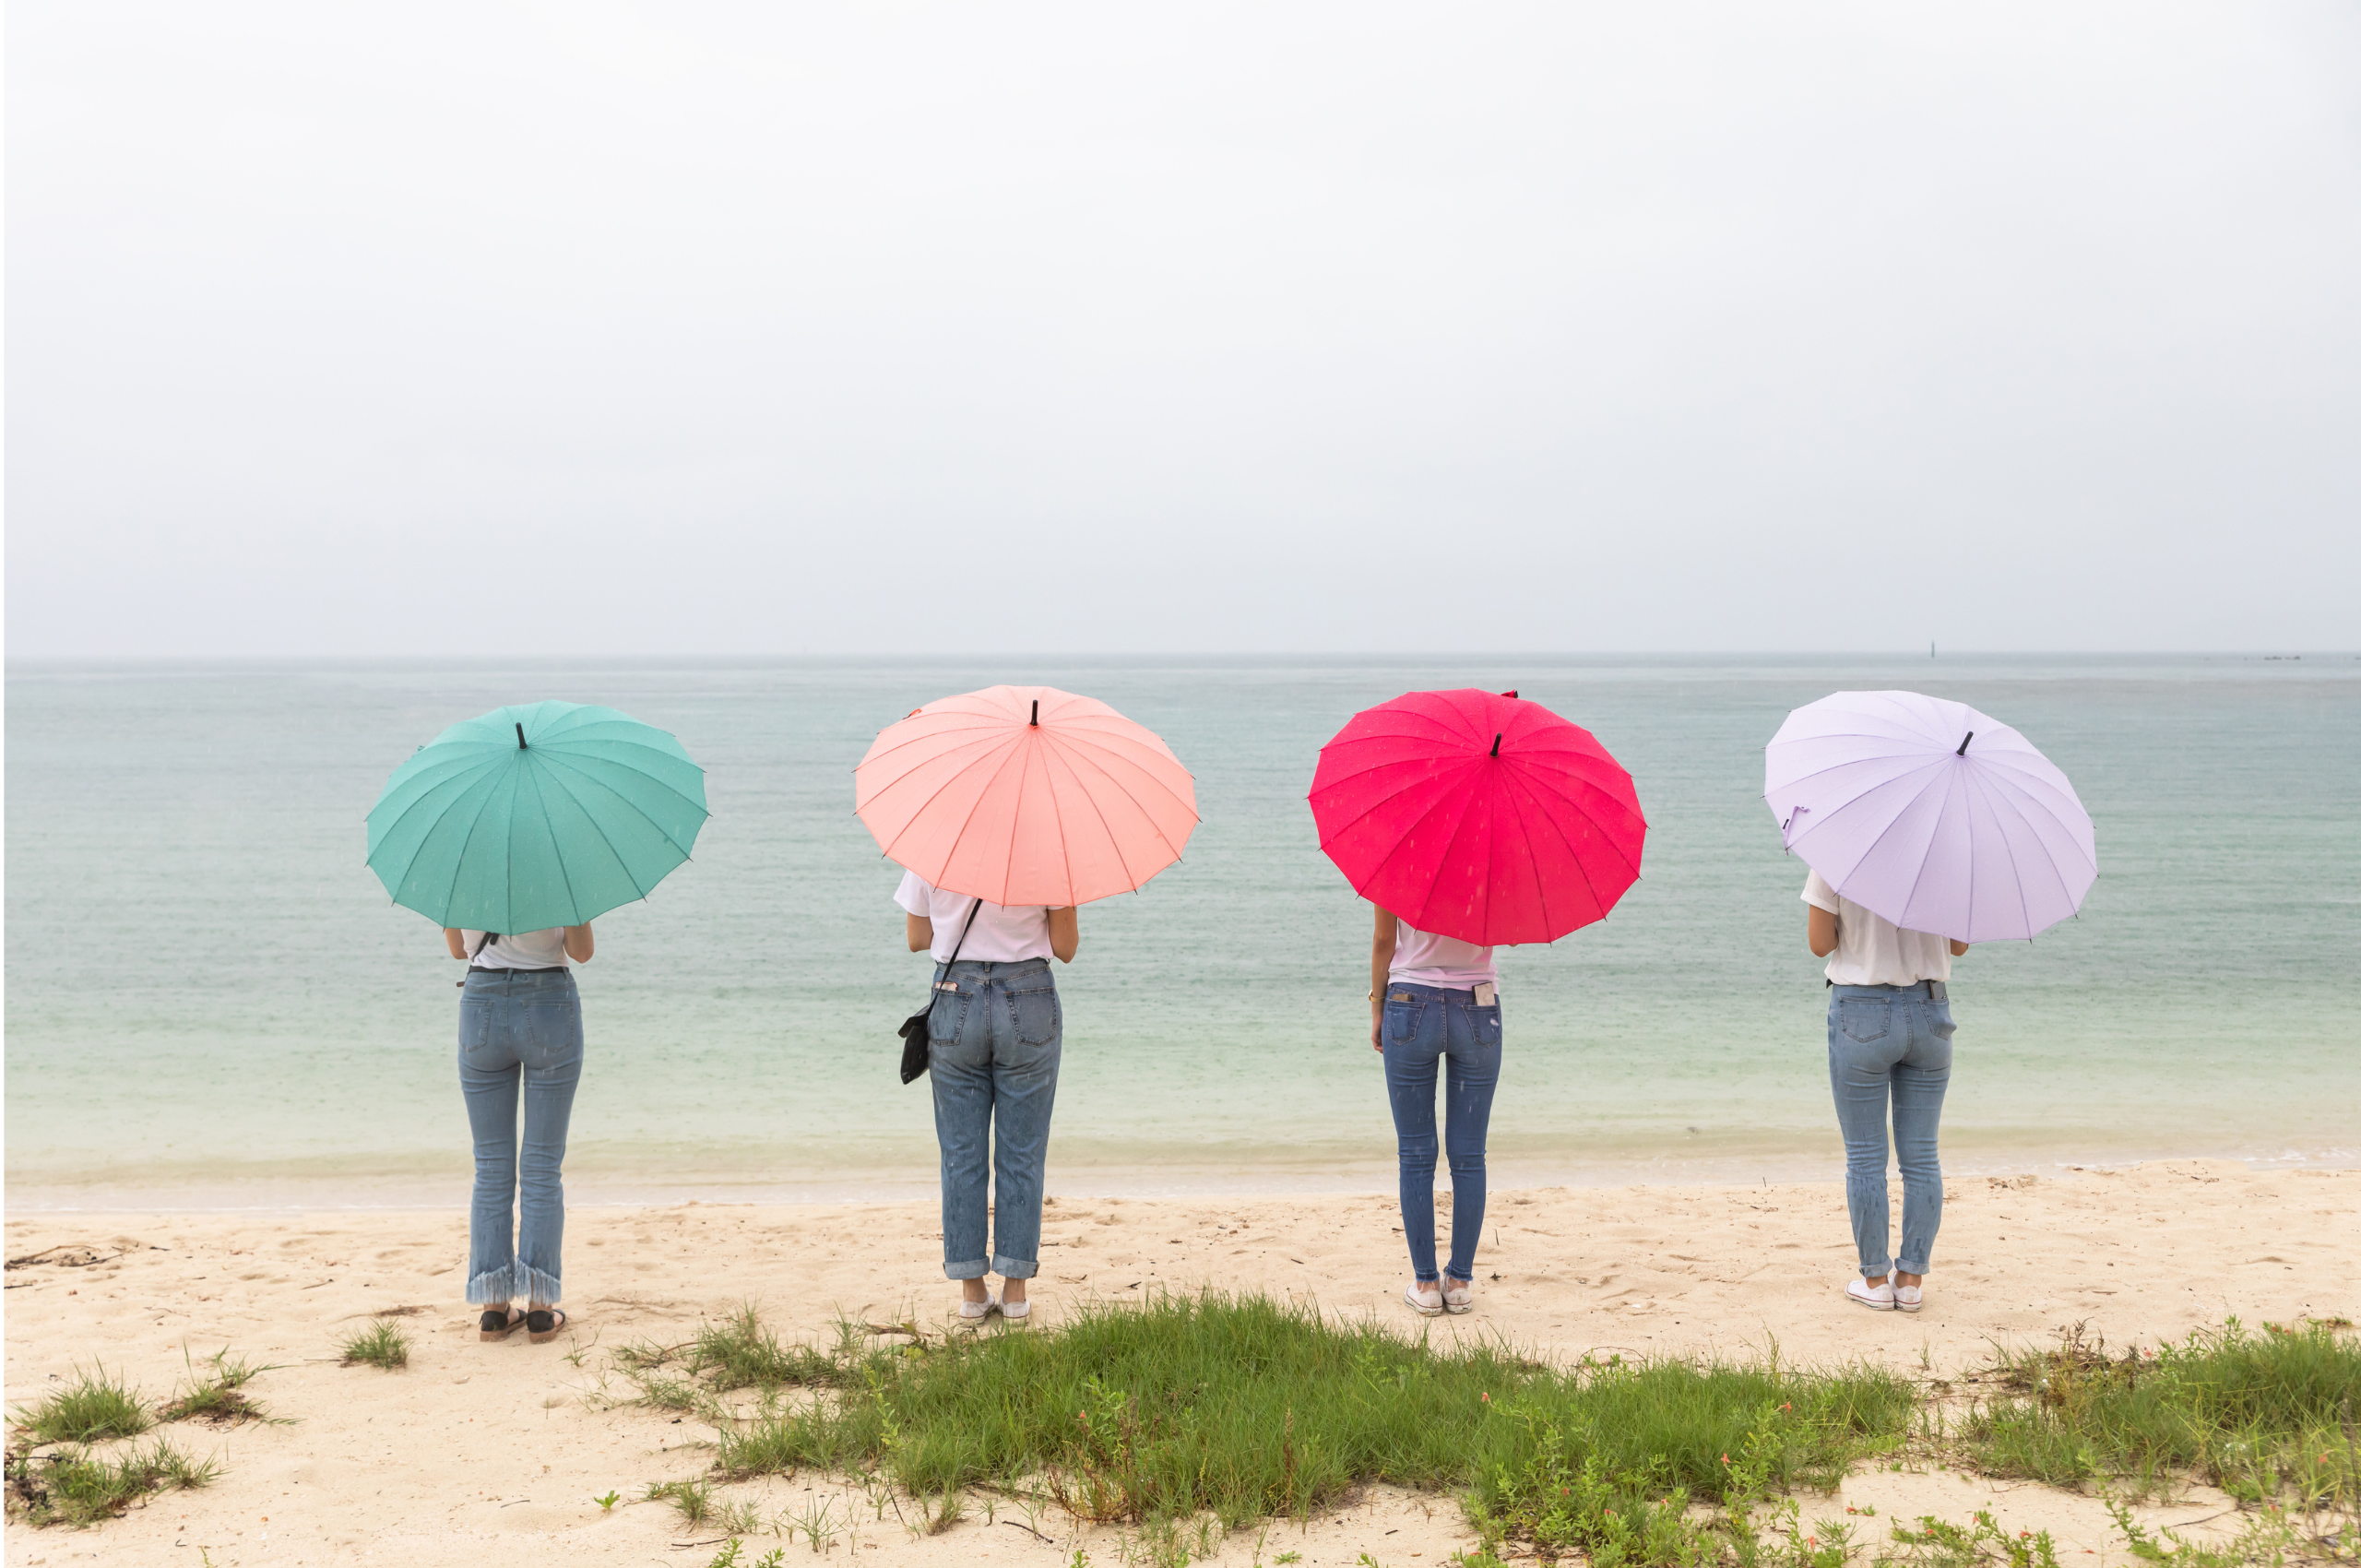 4 women standing on a beach with different colored umbrellas symbolizing the different types of PCOS